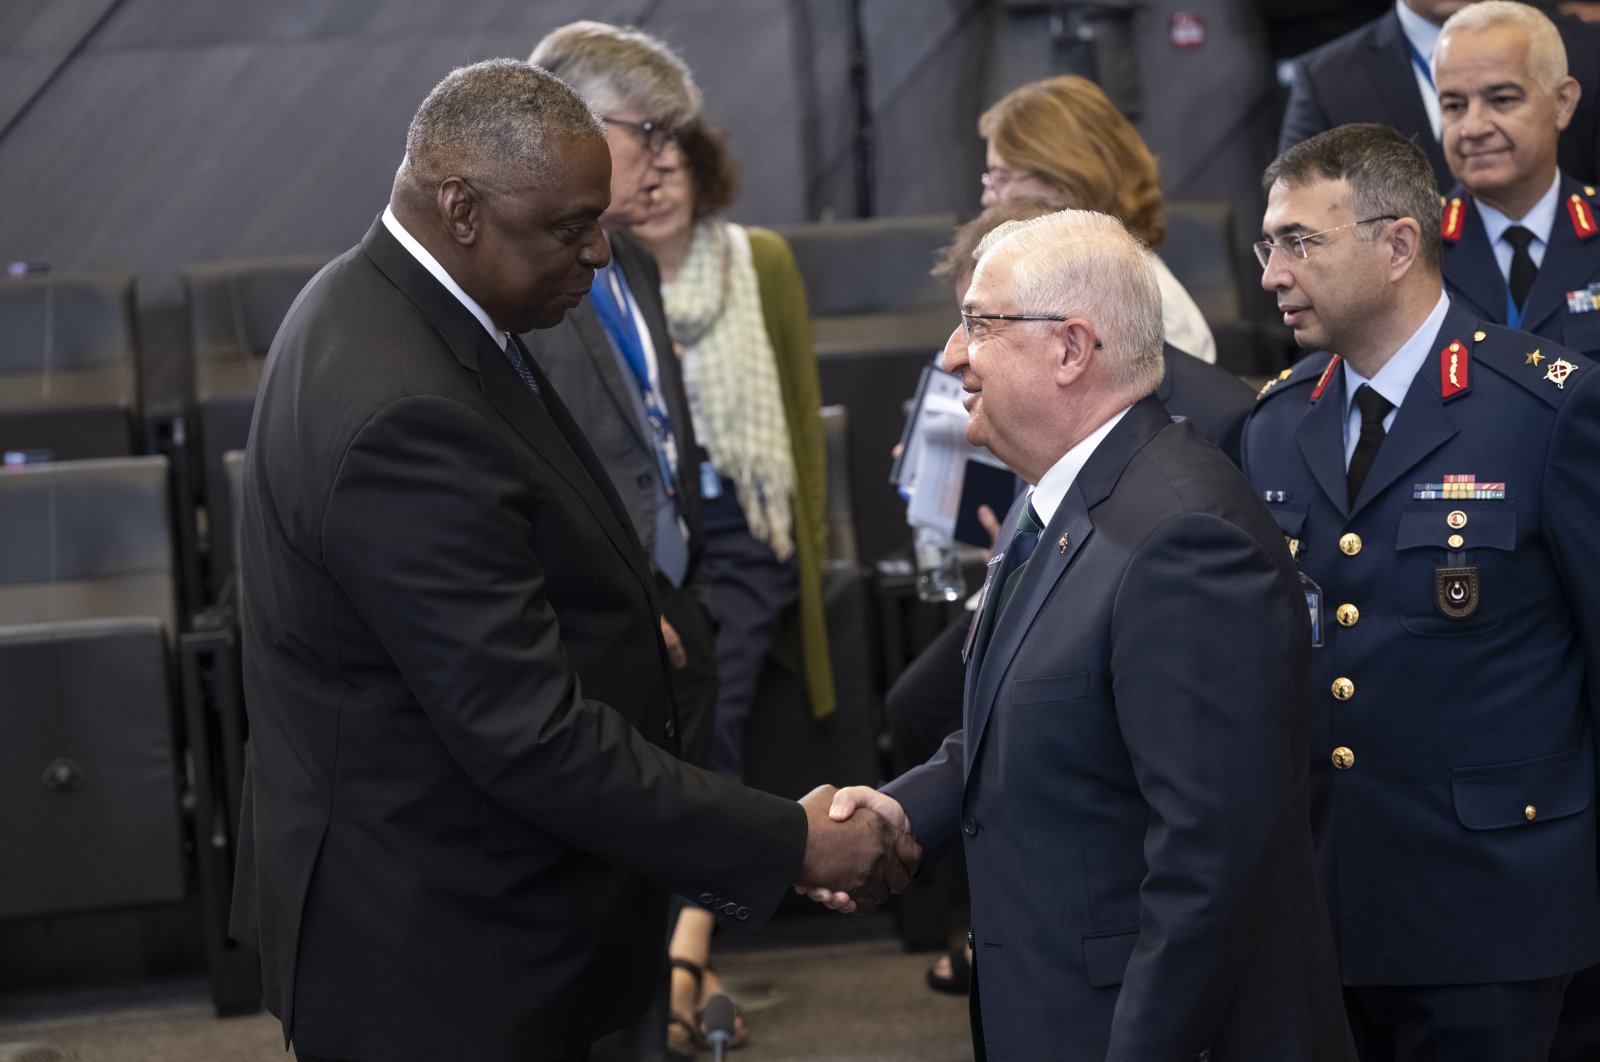 Defense ministers of NATO countries met on the second day of their meeting in Brussels. Minister of National Defense Yaşar Güler (R) had a conversation with U.S. Secretary of Defense Lloyd Austin at the meeting, Belgium, June 16, 2023. (AA Photo)